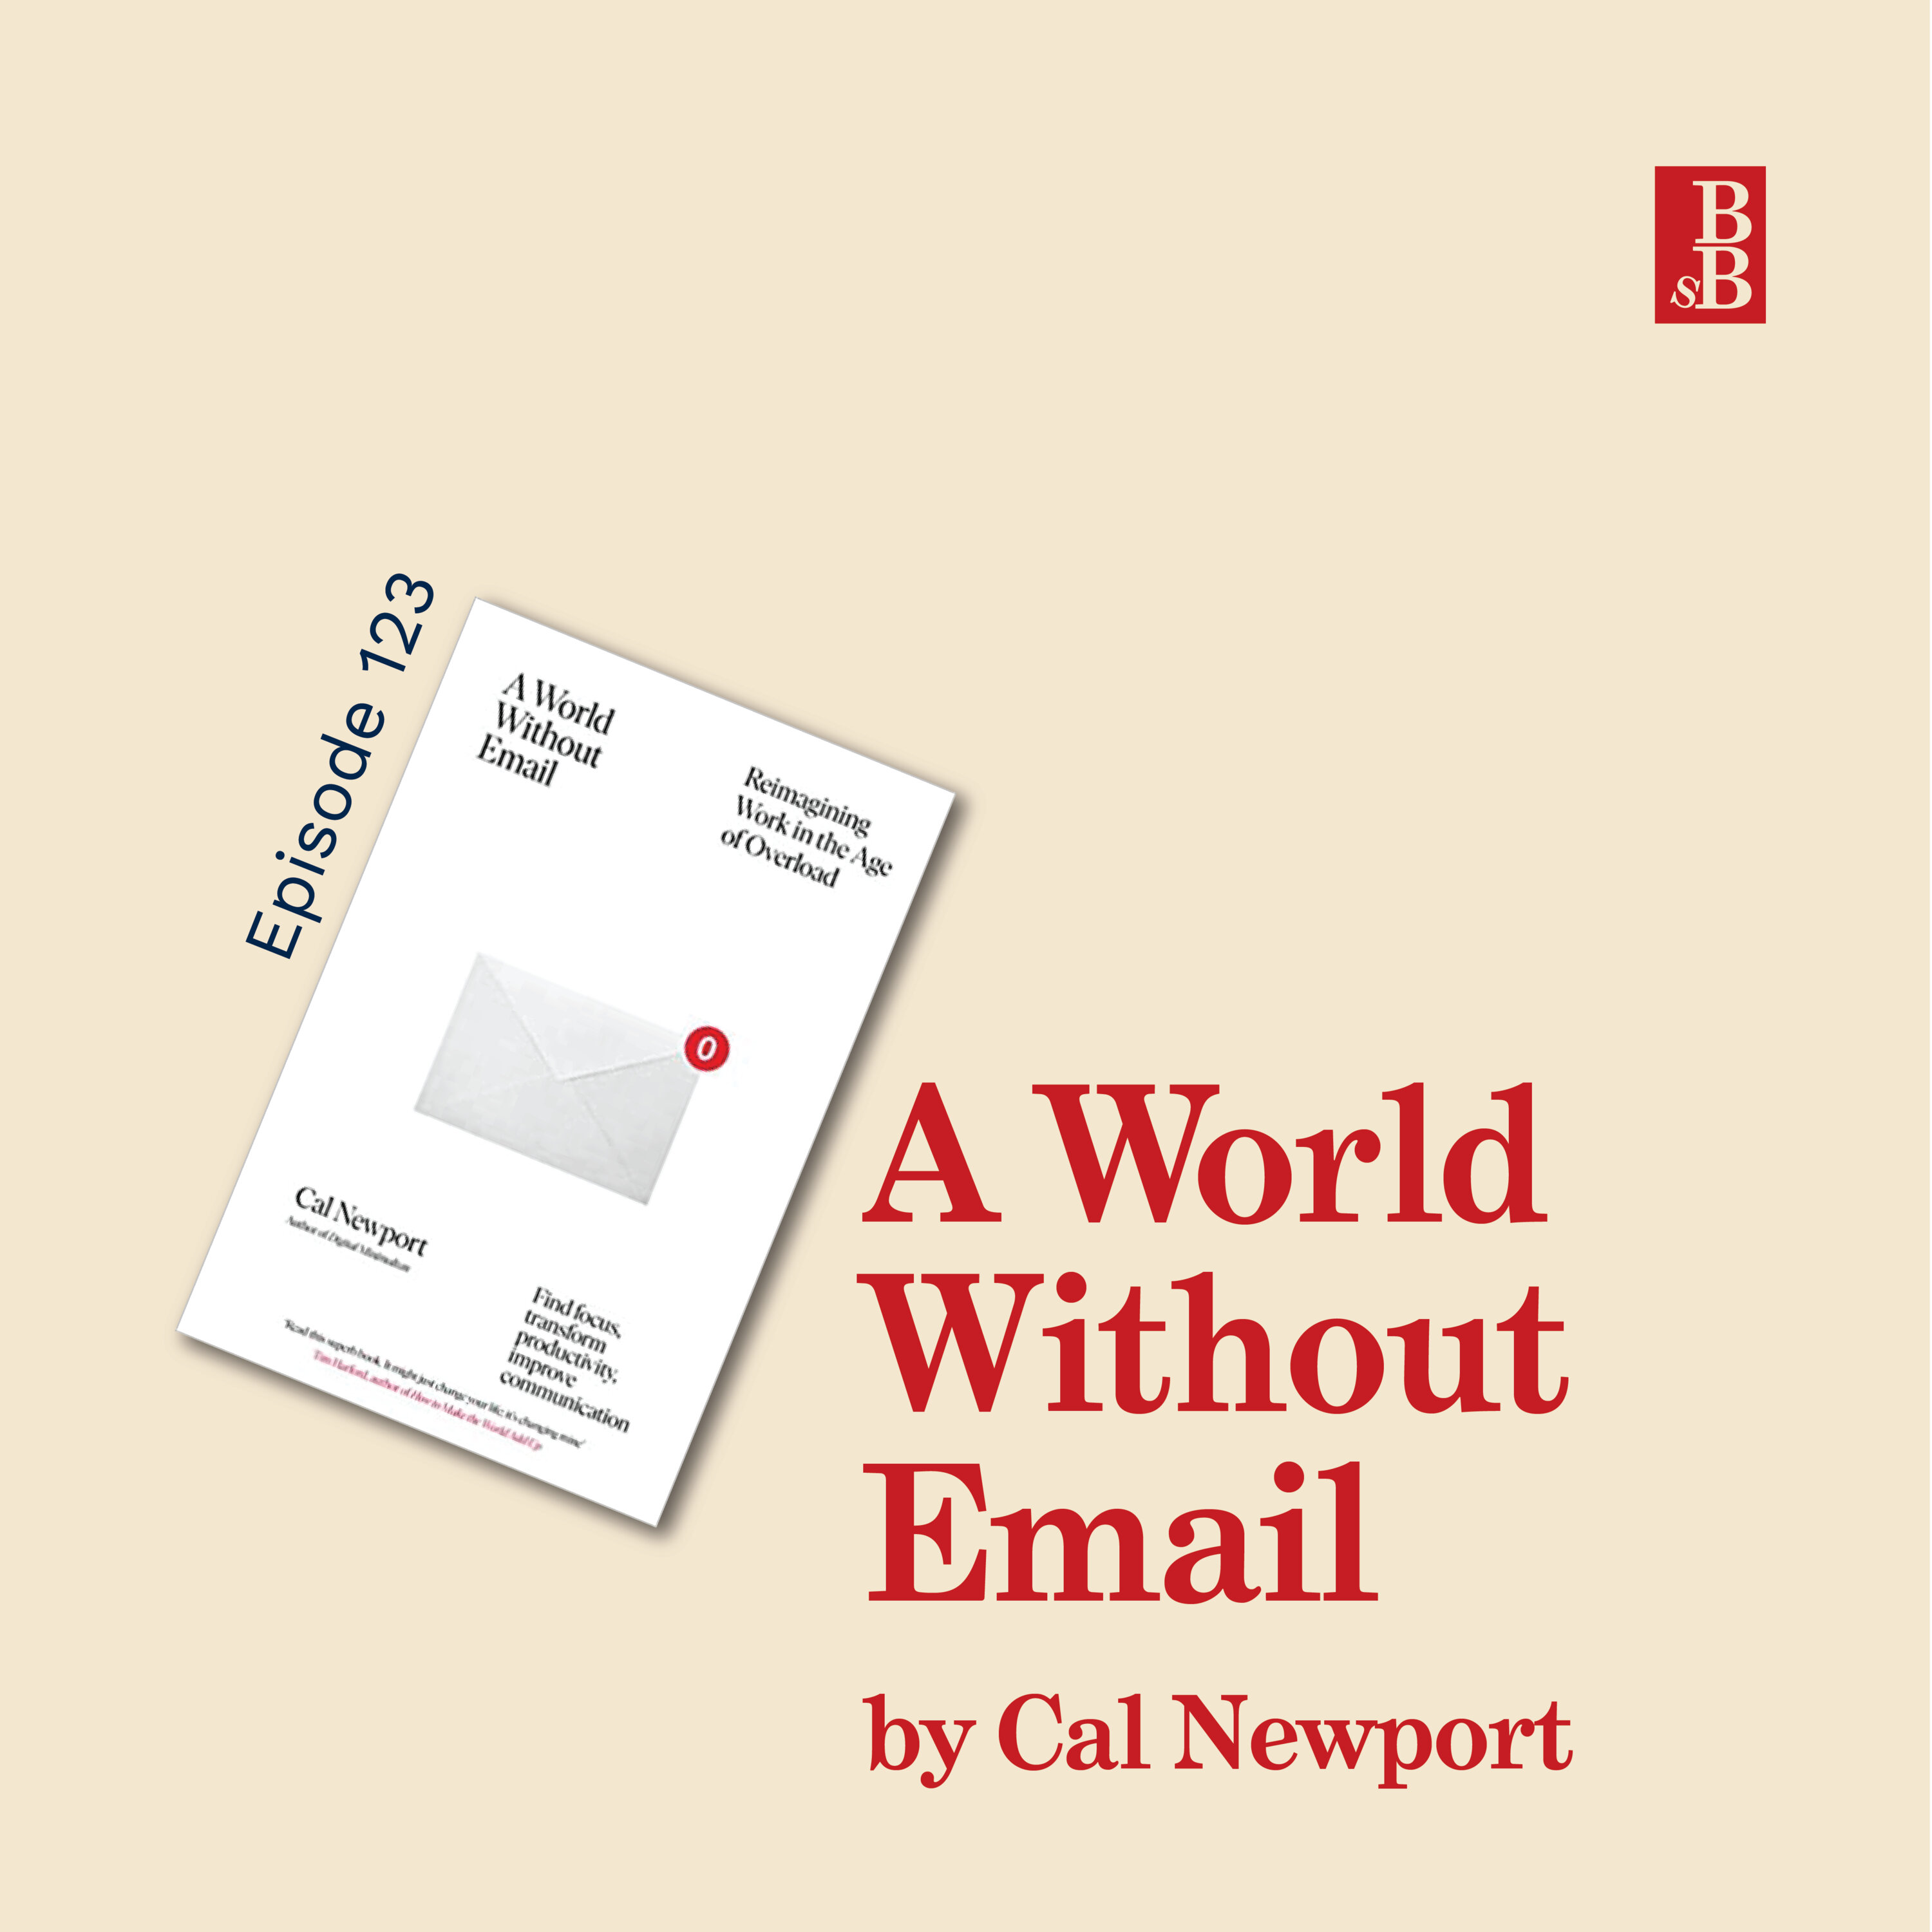 A World Without Email by Cal Newport - why you need to rethink your relationship with your inbox Image